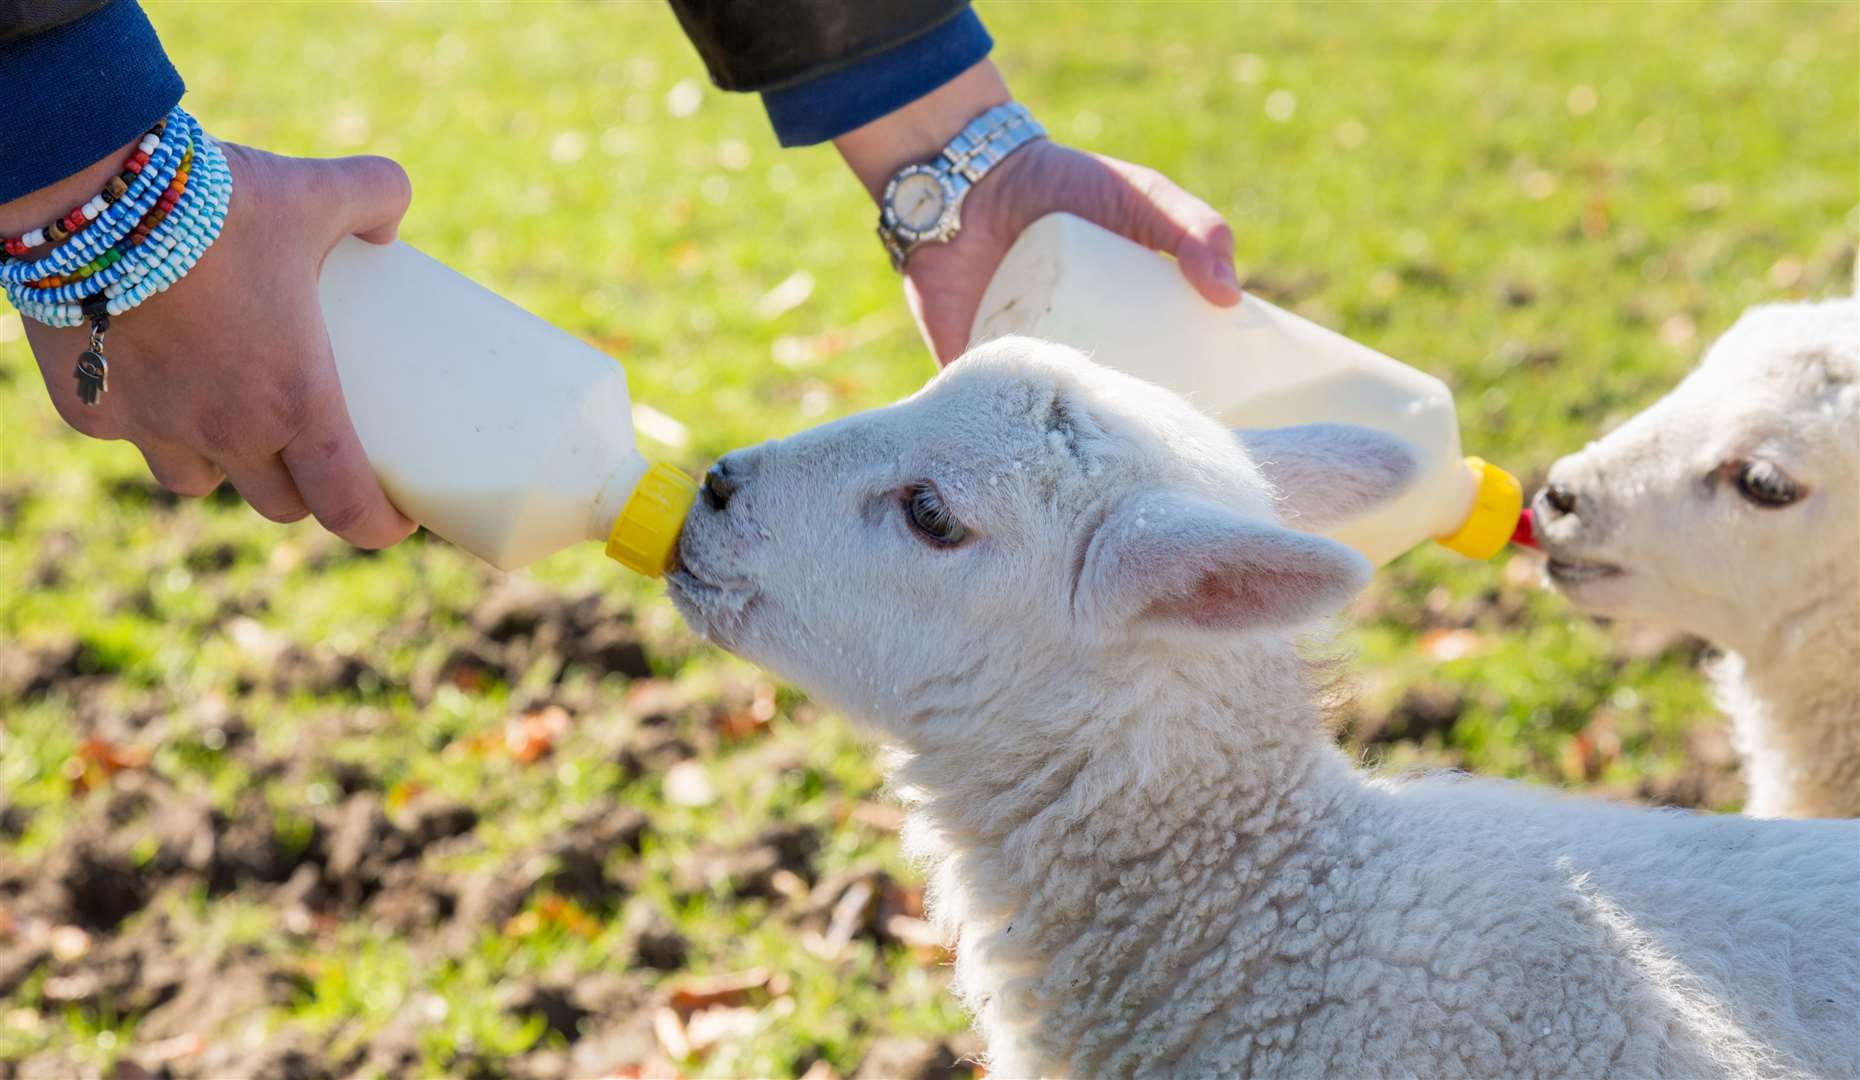 At many farms, handlers and farmers bottle-fed the lambs themselves. Picture: iStock